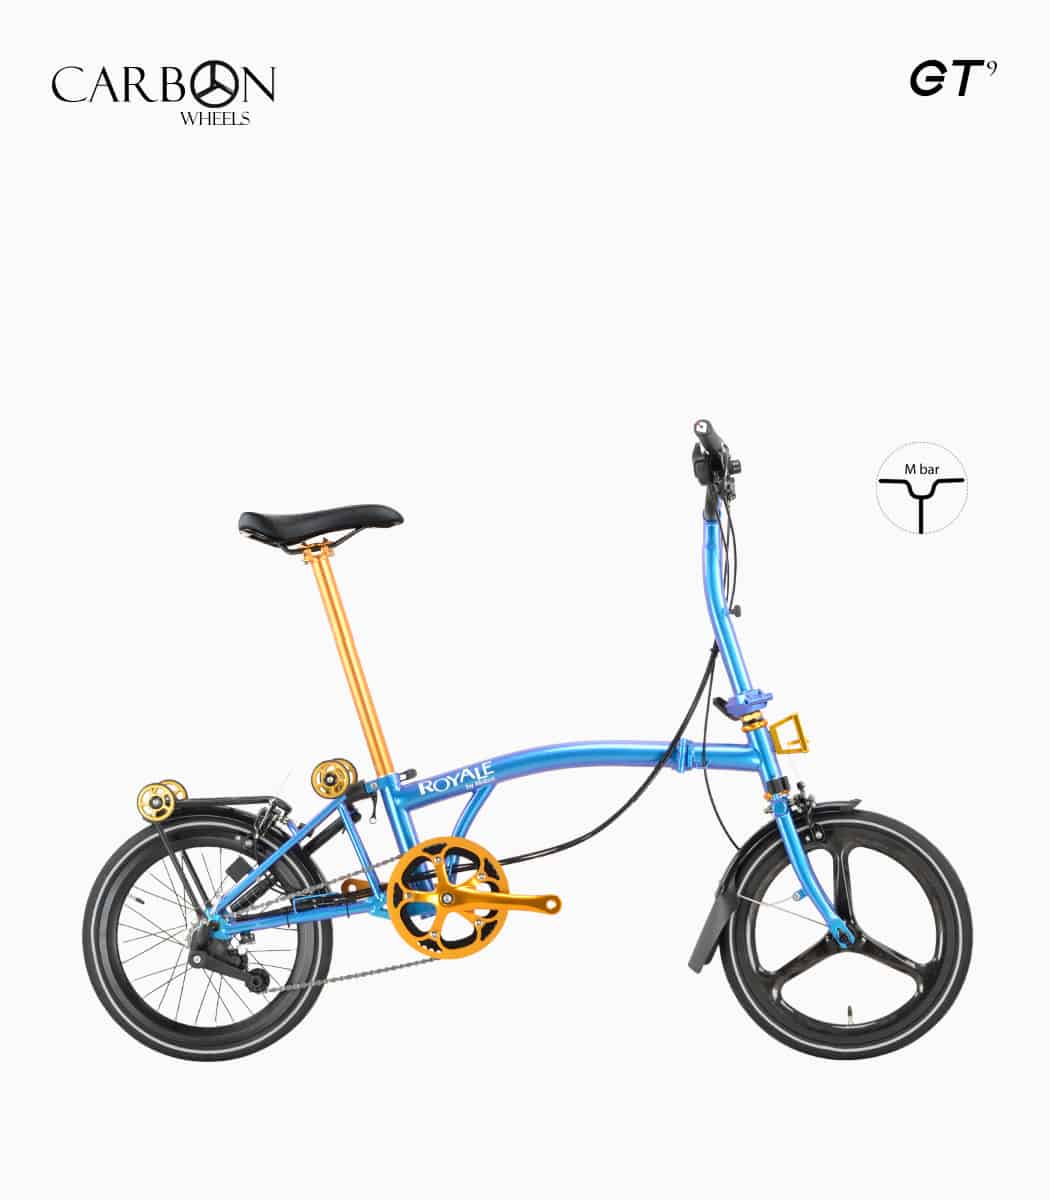 ROYALE CARBON GT M9 (NEPTUNE BLUE) foldable bicycle M bar with gold components right